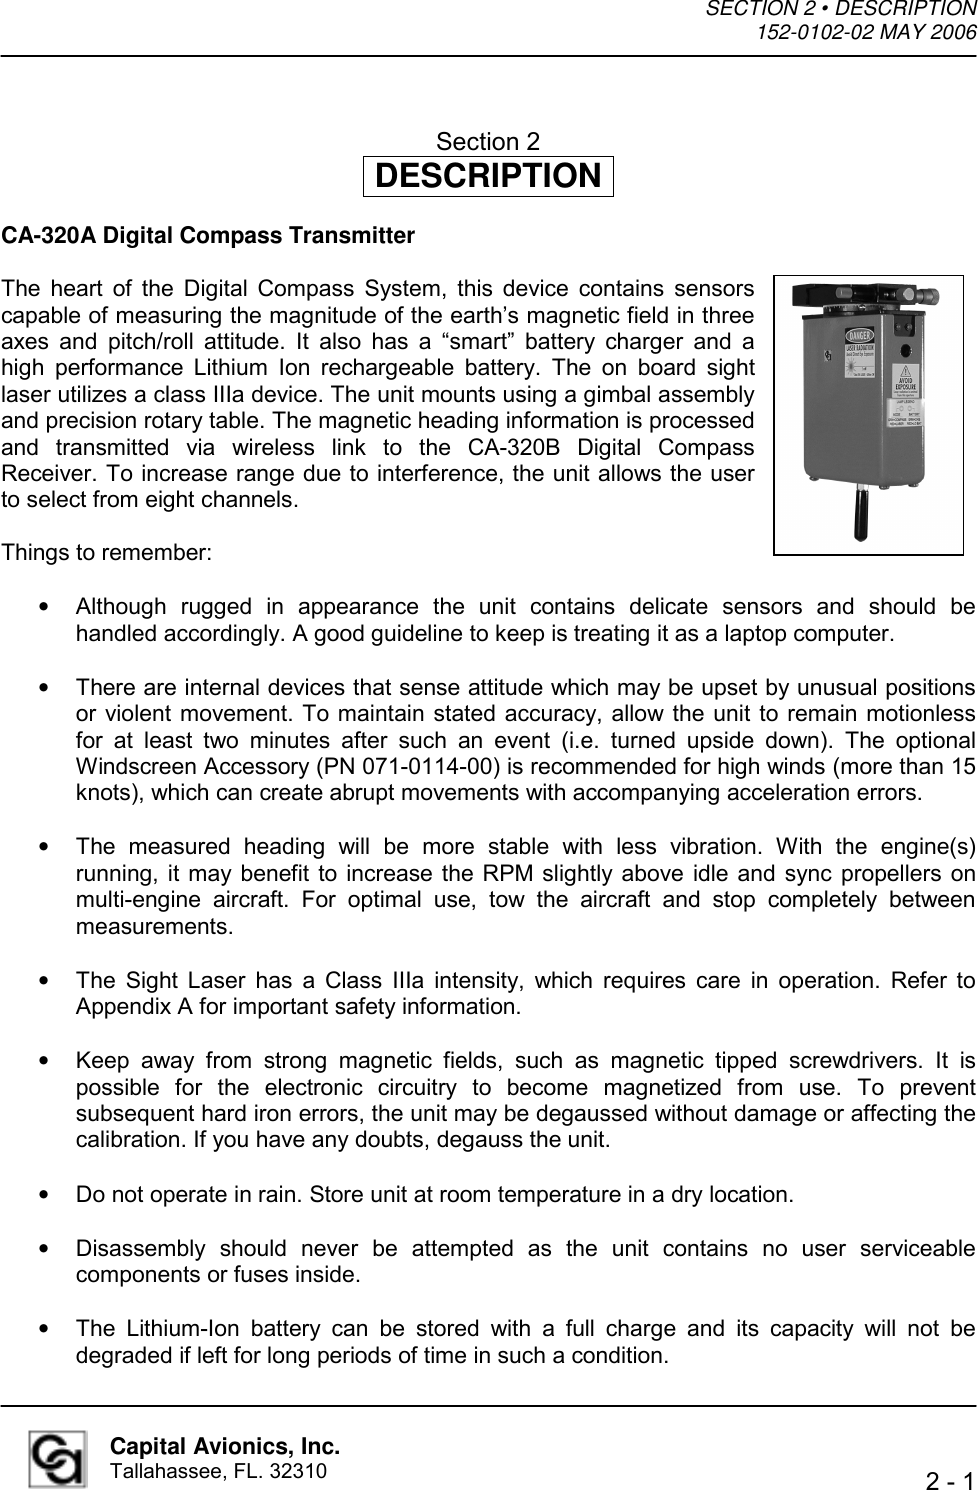 SECTION 2 • DESCRIPTION  152-0102-02 MAY 2006    2 - 1  Capital Avionics, Inc. Tallahassee, FL. 32310  Section 2 DESCRIPTION  CA-320A Digital Compass Transmitter  The heart of the Digital Compass System, this device contains sensors capable of measuring the magnitude of the earth’s magnetic field in three axes and pitch/roll attitude. It also has a “smart” battery charger and a high performance Lithium Ion rechargeable battery. The on board sight laser utilizes a class IIIa device. The unit mounts using a gimbal assembly and precision rotary table. The magnetic heading information is processed and transmitted via wireless link to the CA-320B Digital Compass Receiver. To increase range due to interference, the unit allows the user to select from eight channels.  Things to remember:  •  Although rugged in appearance the unit contains delicate sensors and should be handled accordingly. A good guideline to keep is treating it as a laptop computer.  •  There are internal devices that sense attitude which may be upset by unusual positions or violent movement. To maintain stated accuracy, allow the unit to remain motionless for at least two minutes after such an event (i.e. turned upside down). The optional Windscreen Accessory (PN 071-0114-00) is recommended for high winds (more than 15 knots), which can create abrupt movements with accompanying acceleration errors.  •  The measured heading will be more stable with less vibration. With the engine(s) running, it may benefit to increase the RPM slightly above idle and sync propellers on multi-engine aircraft. For optimal use, tow the aircraft and stop completely between measurements.  •  The Sight Laser has a Class IIIa intensity, which requires care in operation. Refer to Appendix A for important safety information.  •  Keep away from strong magnetic fields, such as magnetic tipped screwdrivers. It is possible for the electronic circuitry to become magnetized from use. To prevent subsequent hard iron errors, the unit may be degaussed without damage or affecting the calibration. If you have any doubts, degauss the unit.  •  Do not operate in rain. Store unit at room temperature in a dry location.  •  Disassembly should never be attempted as the unit contains no user serviceable components or fuses inside.  •  The Lithium-Ion battery can be stored with a full charge and its capacity will not be degraded if left for long periods of time in such a condition.  